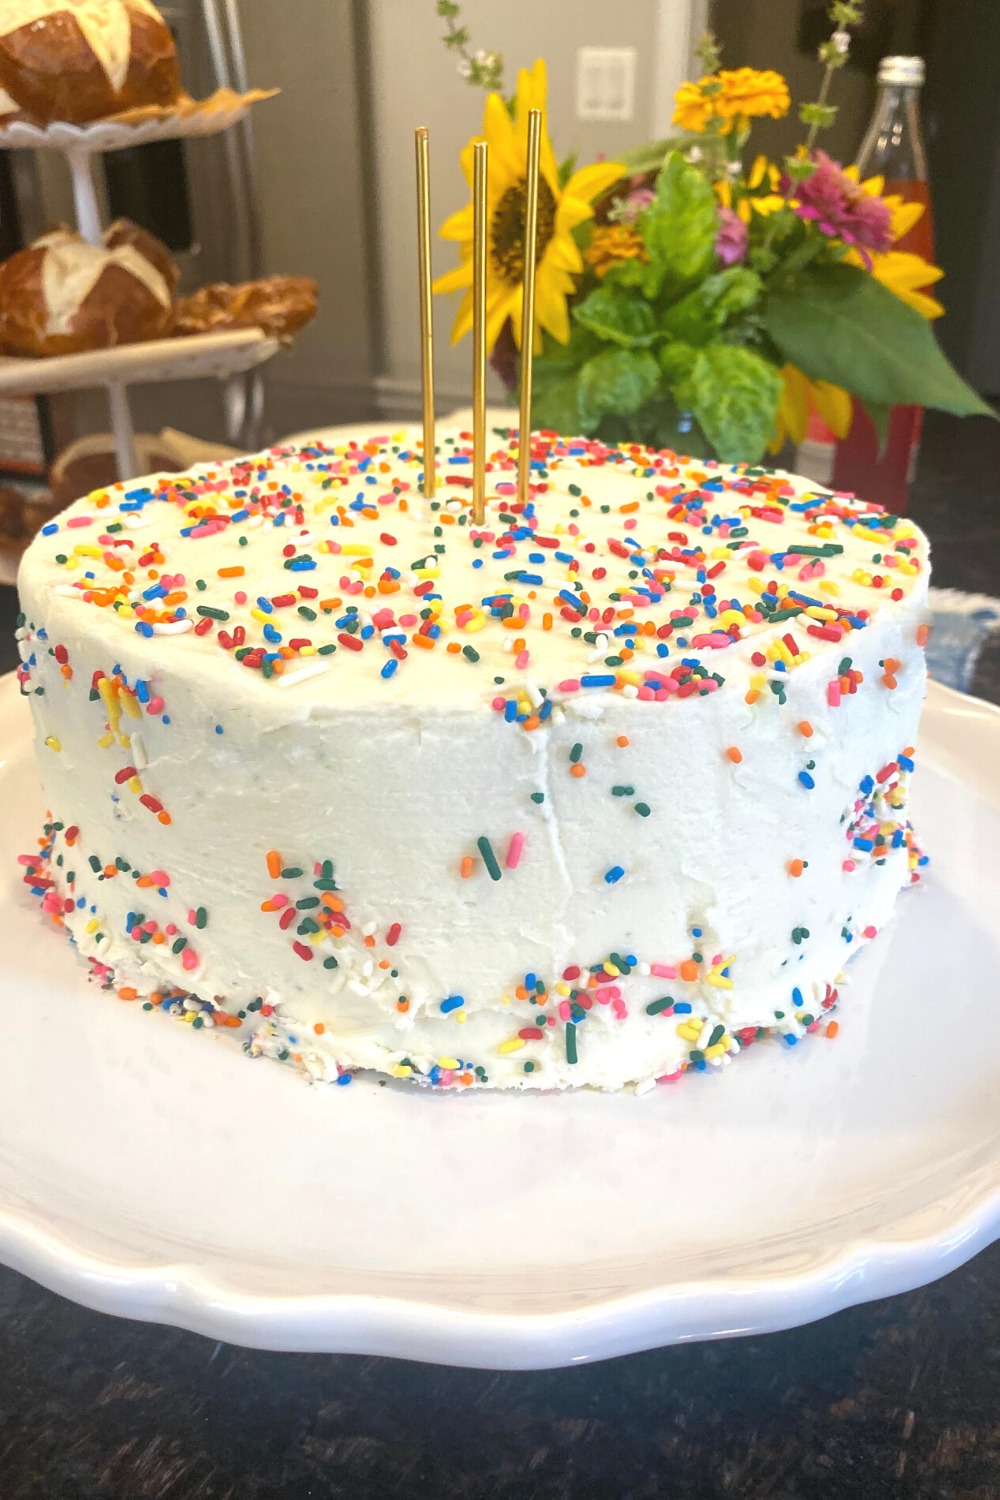 Brownie birthday cake frosted with vanilla buttercream icing, topped with rainbow sprinkles